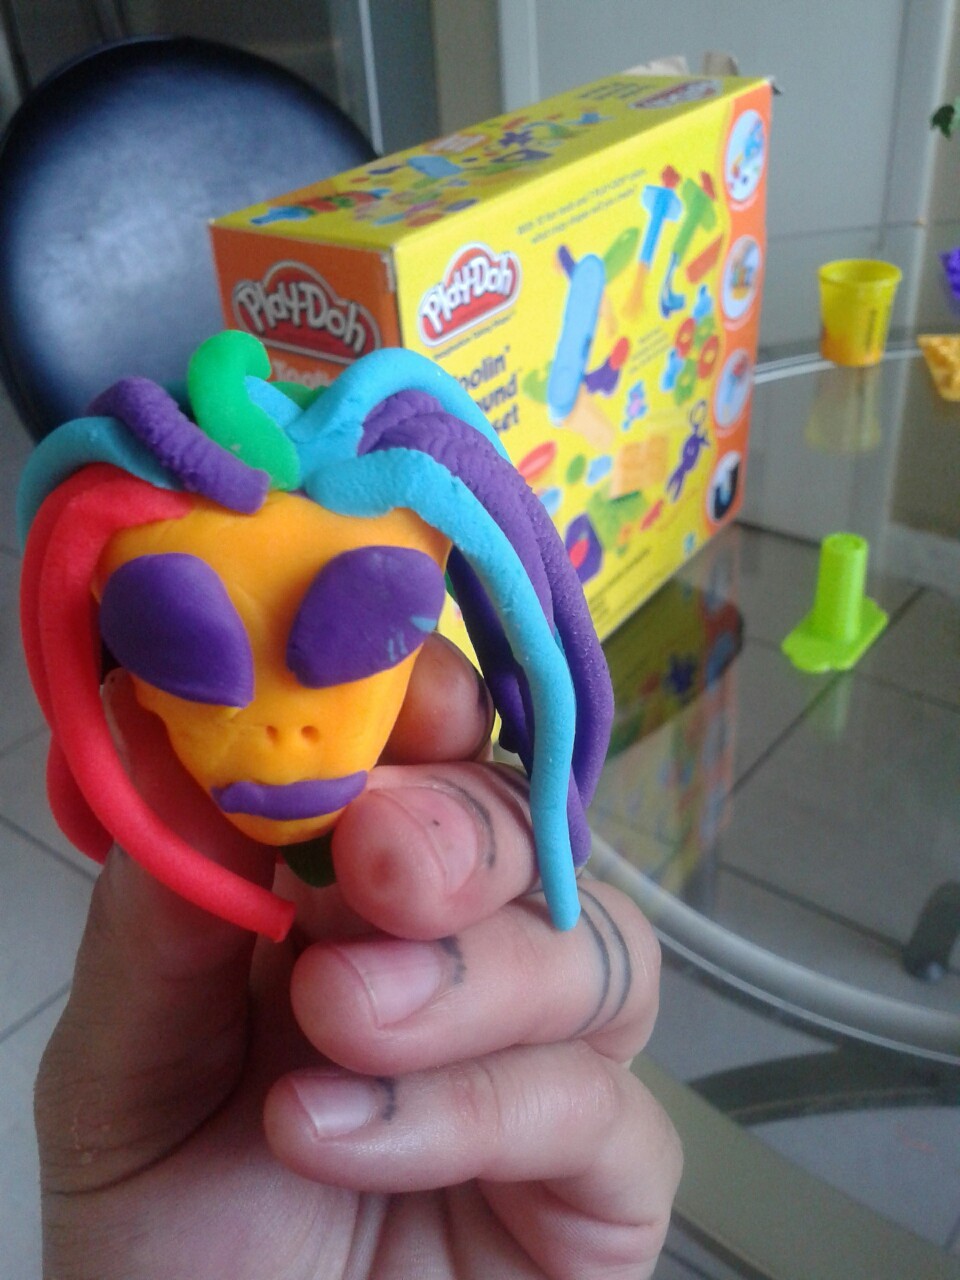 I made a dreadie play doh alien for my nephew.